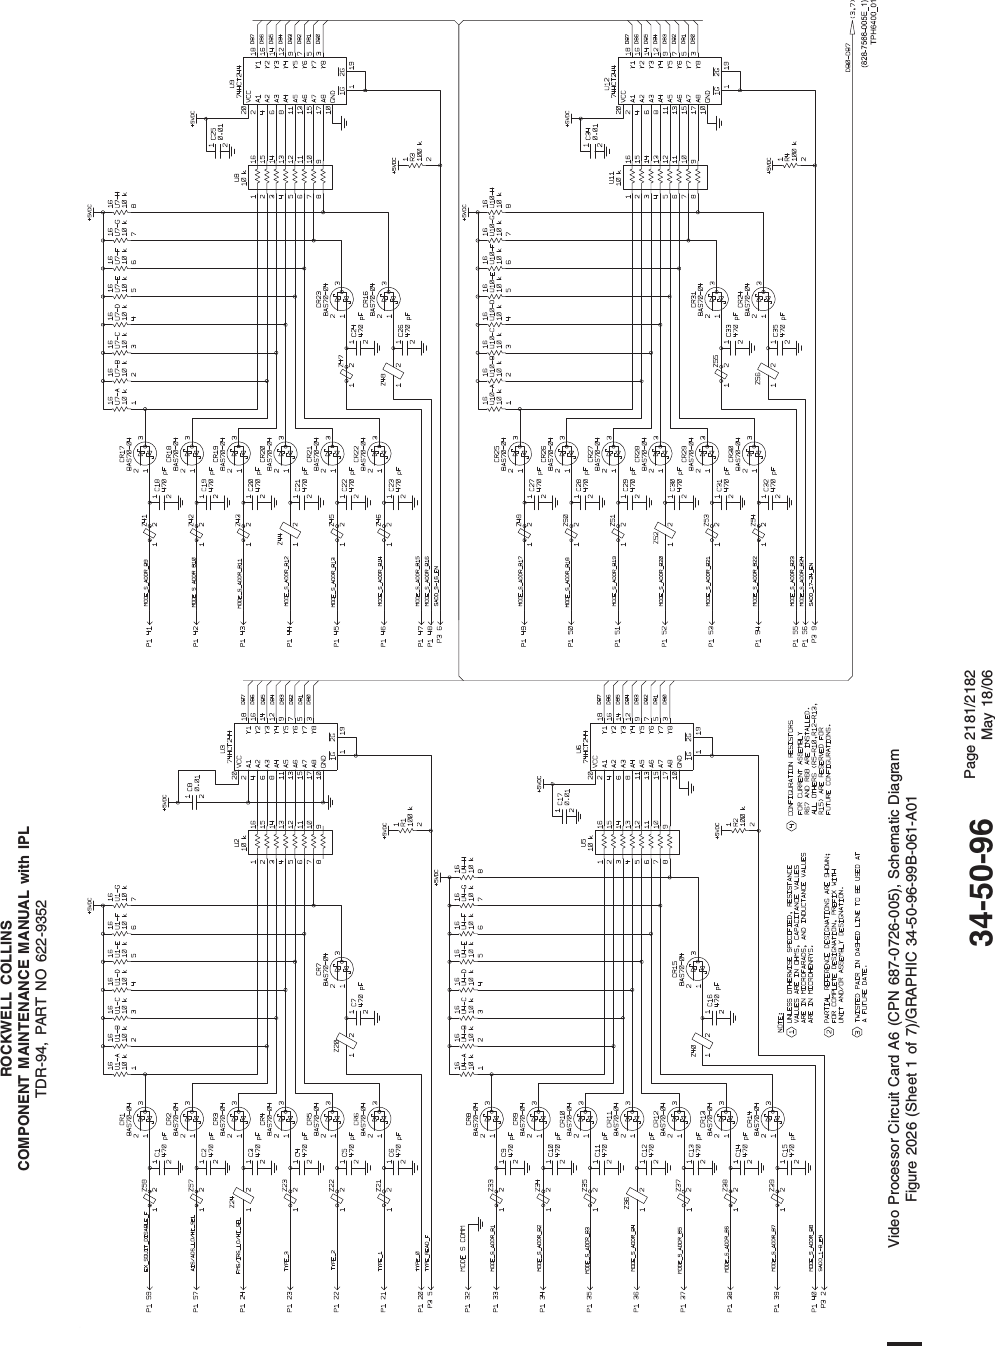 ROCKWELL COLLINSCOMPONENT MAINTENANCE MANUAL with IPLTDR-94, PART NO 622-9352Video Processor Circuit Card A6 (CPN 687-0726-005), Schematic DiagramFigure 2026 (Sheet 1 of 7)/GRAPHIC 34-50-96-99B-061-A0134-50-96 Page 2181/2182May 18/06